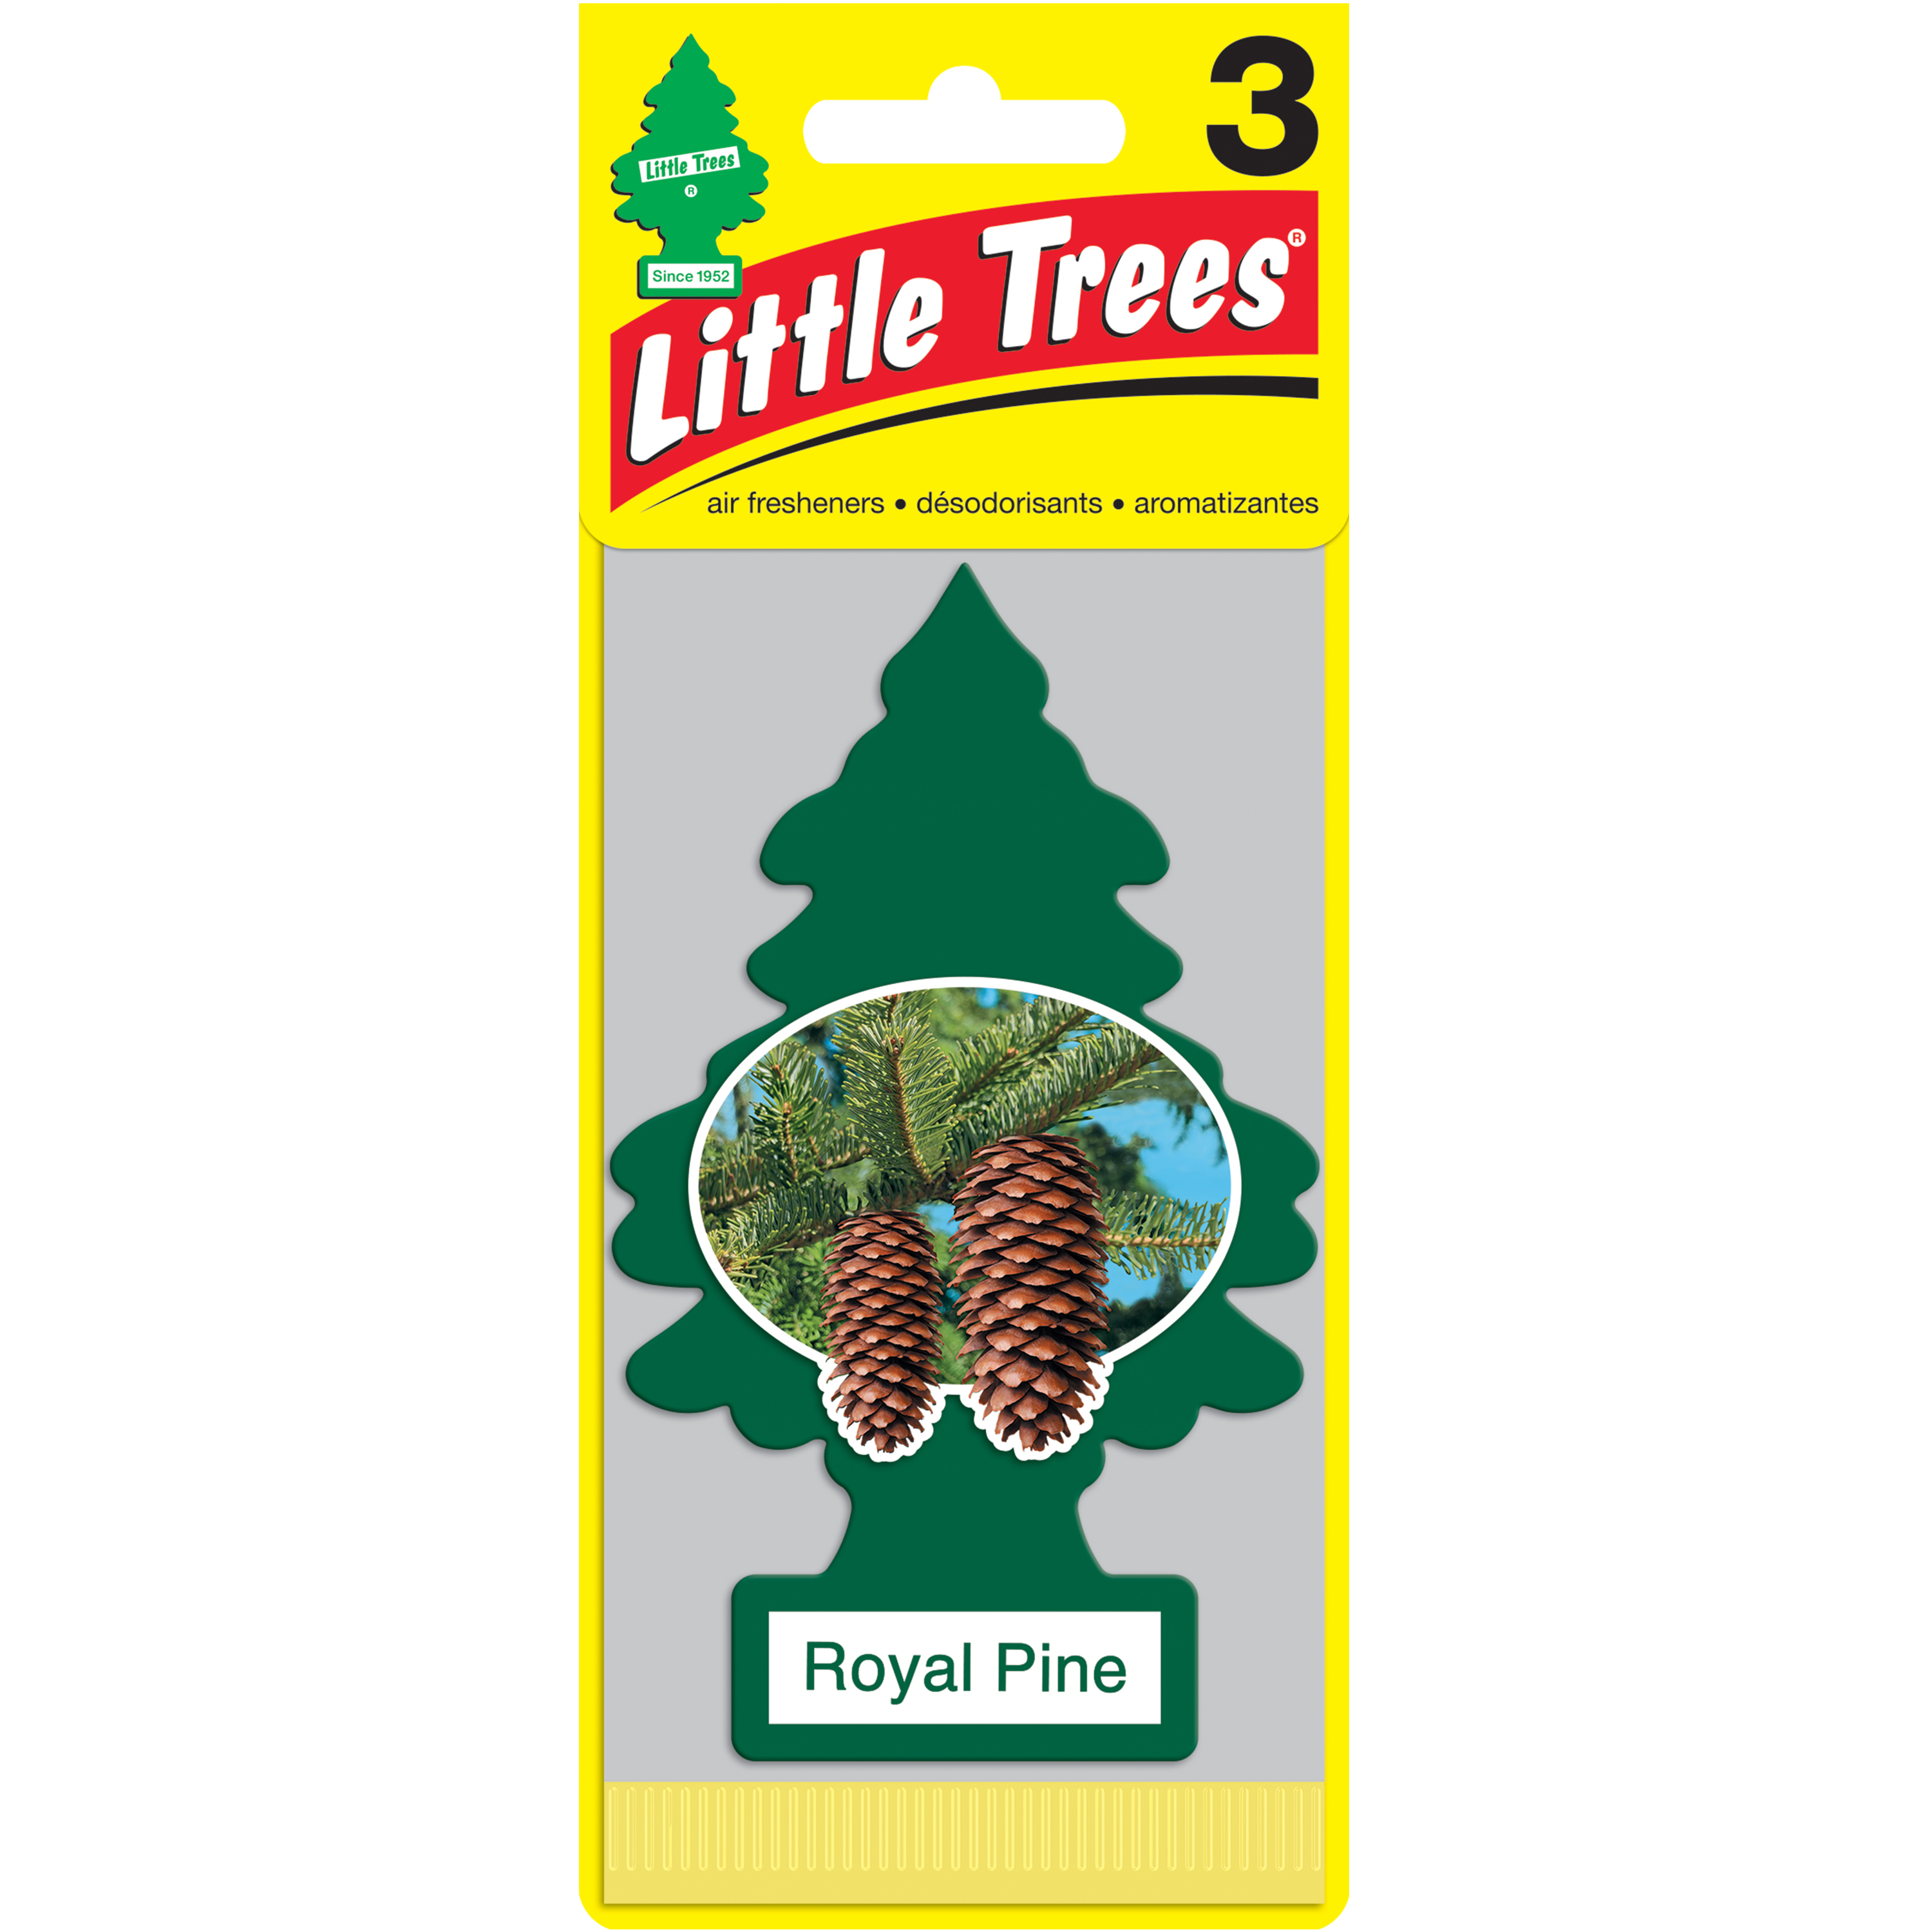 Product Illustration of Little Trees Royal Pine